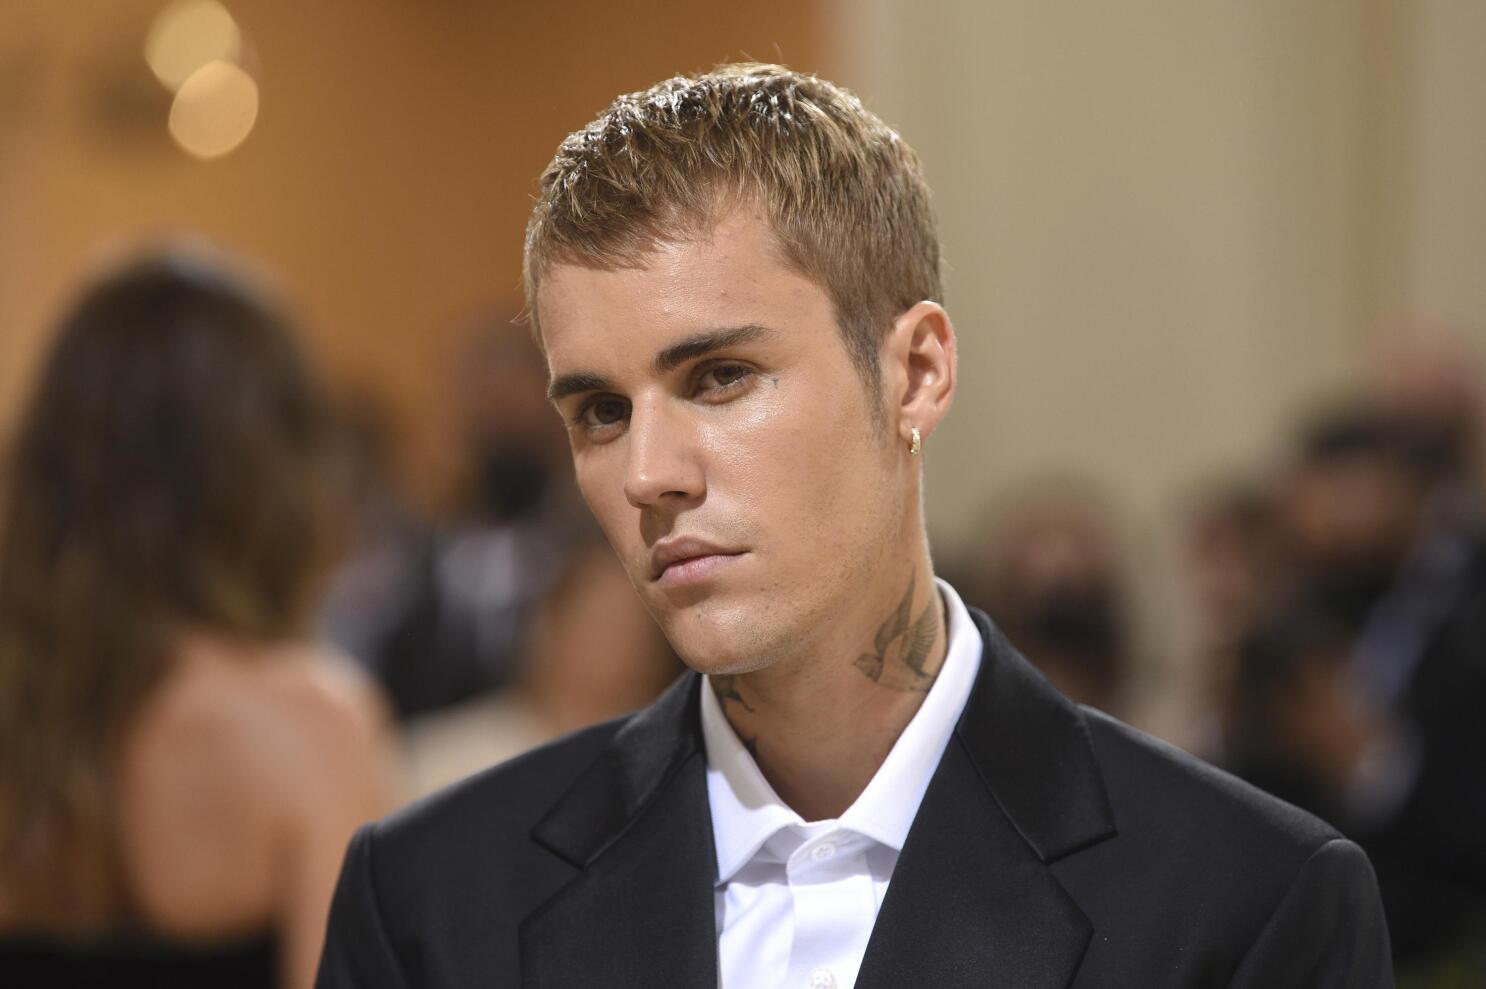 Justin Bieber sells rights to 'Baby,' rest of music catalog